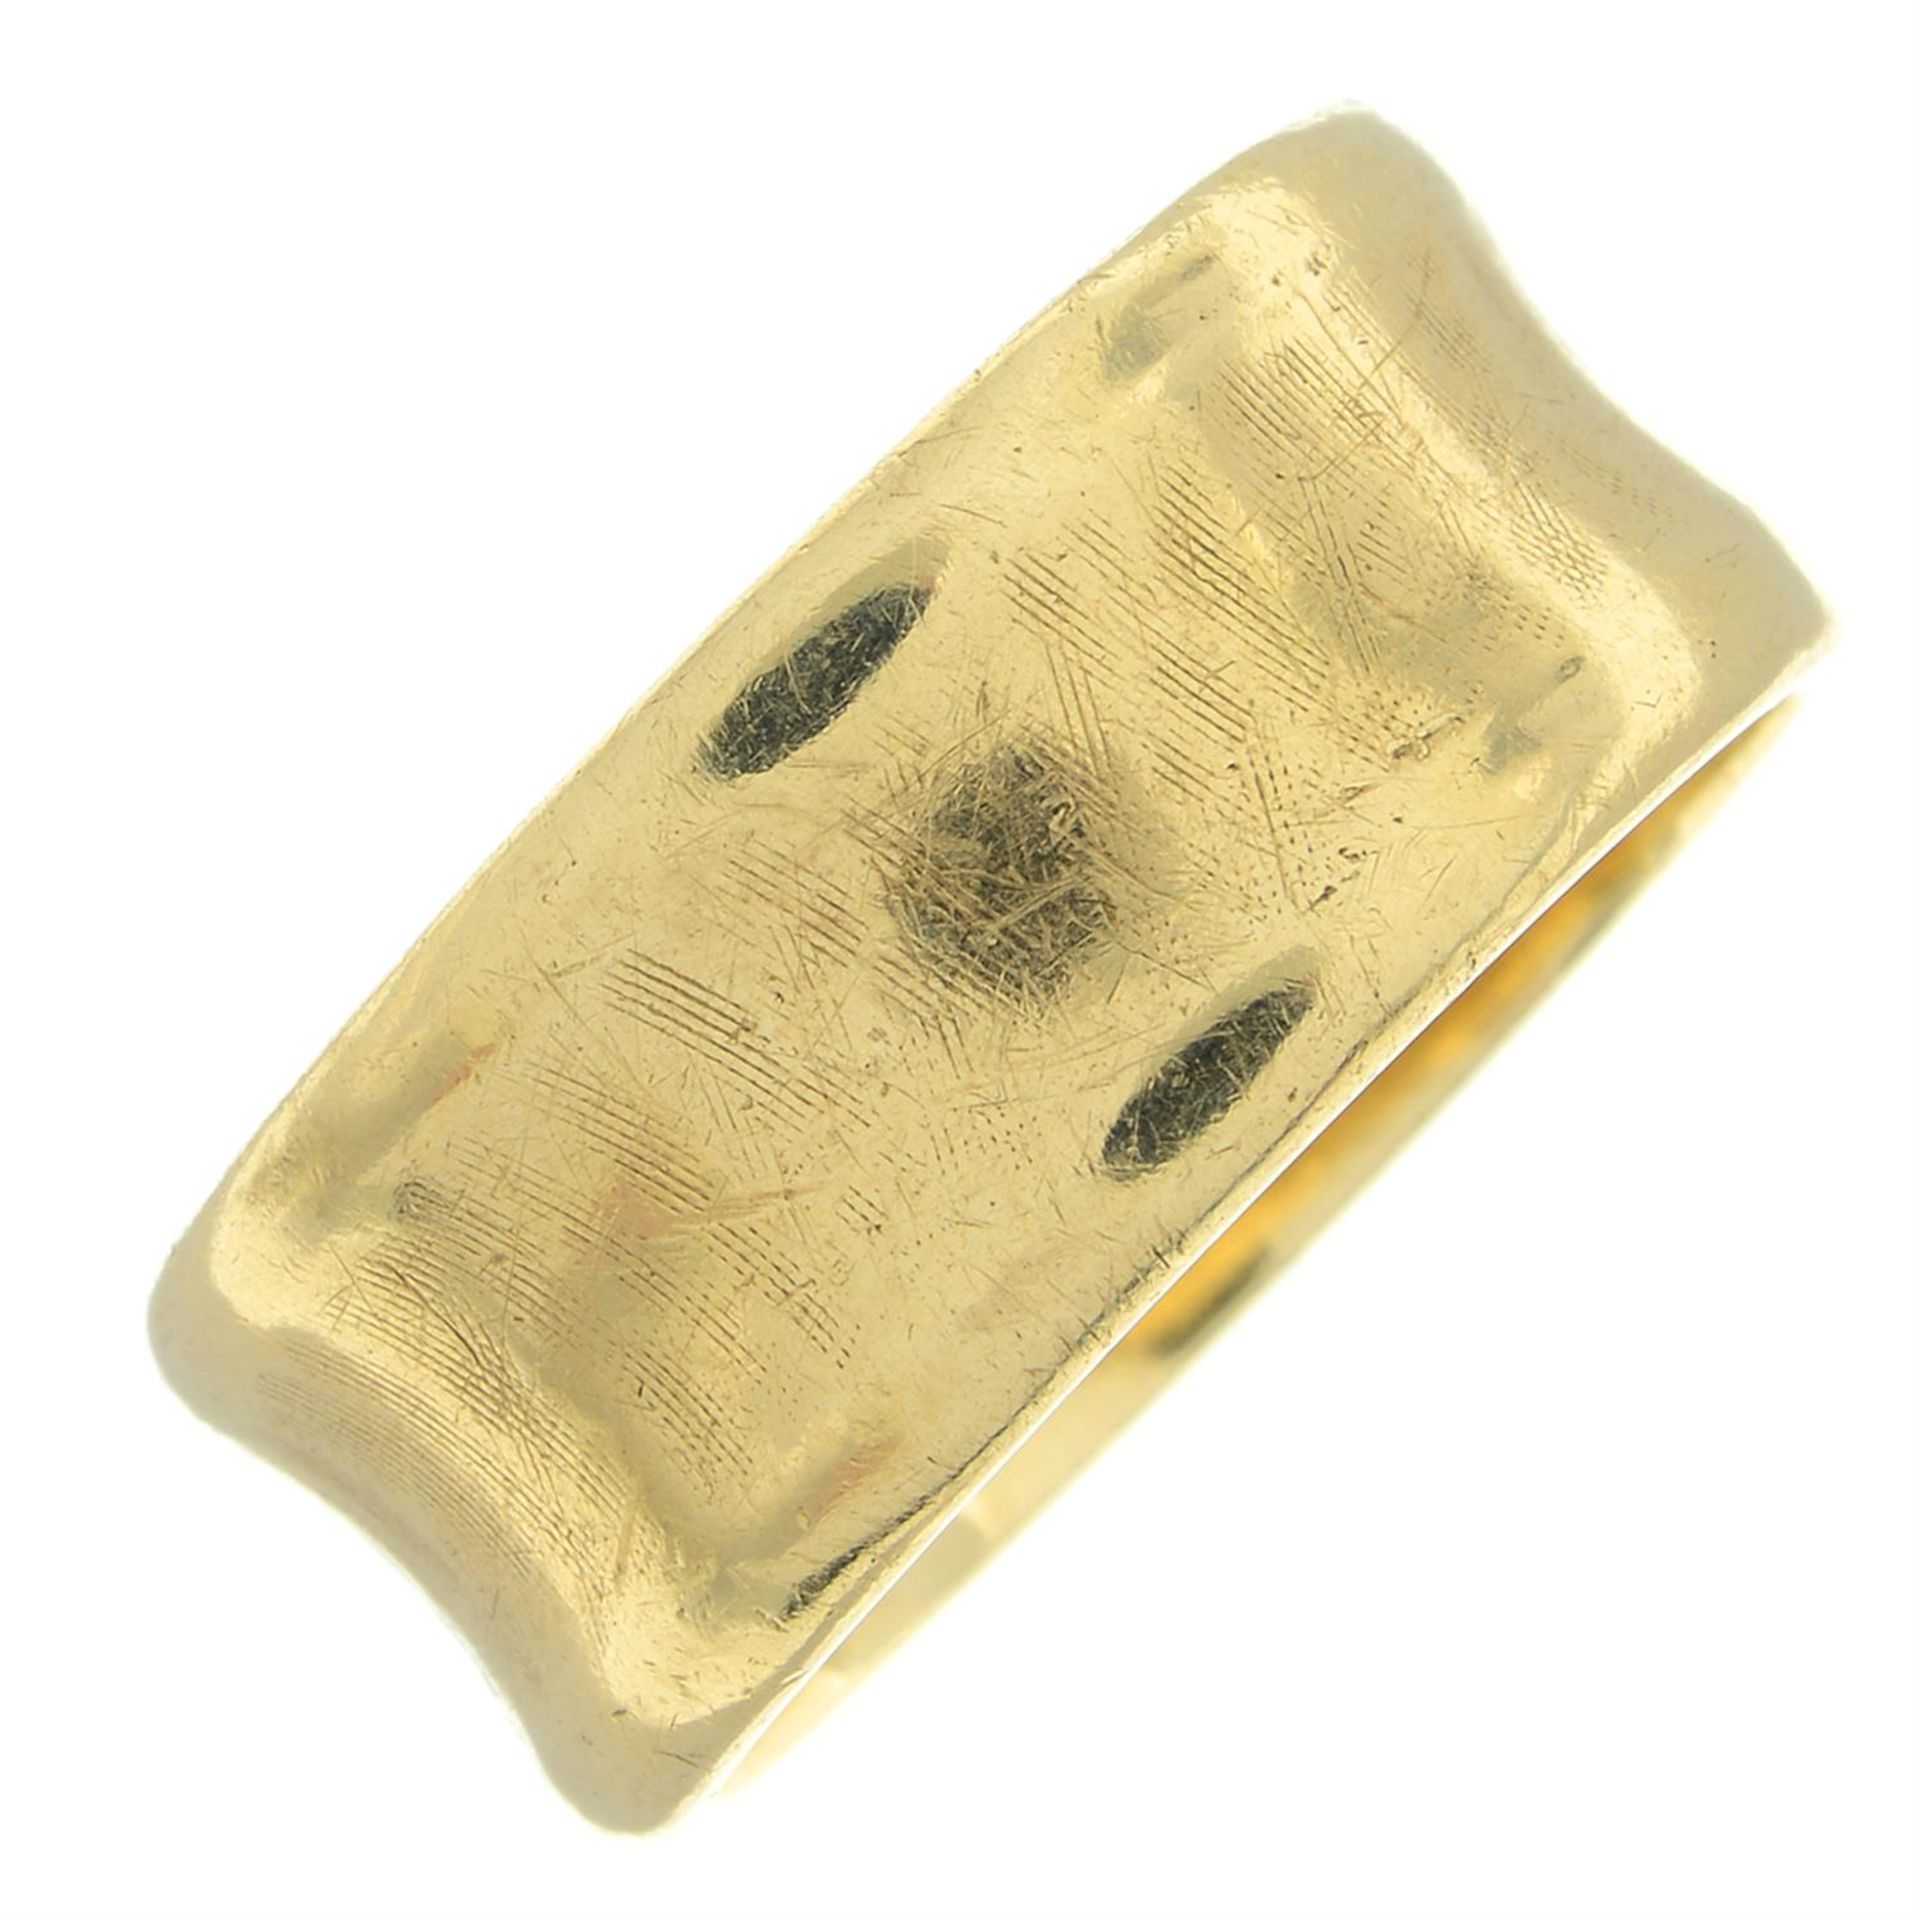 1960s 14ct gold ring, by Cartier - Image 2 of 5